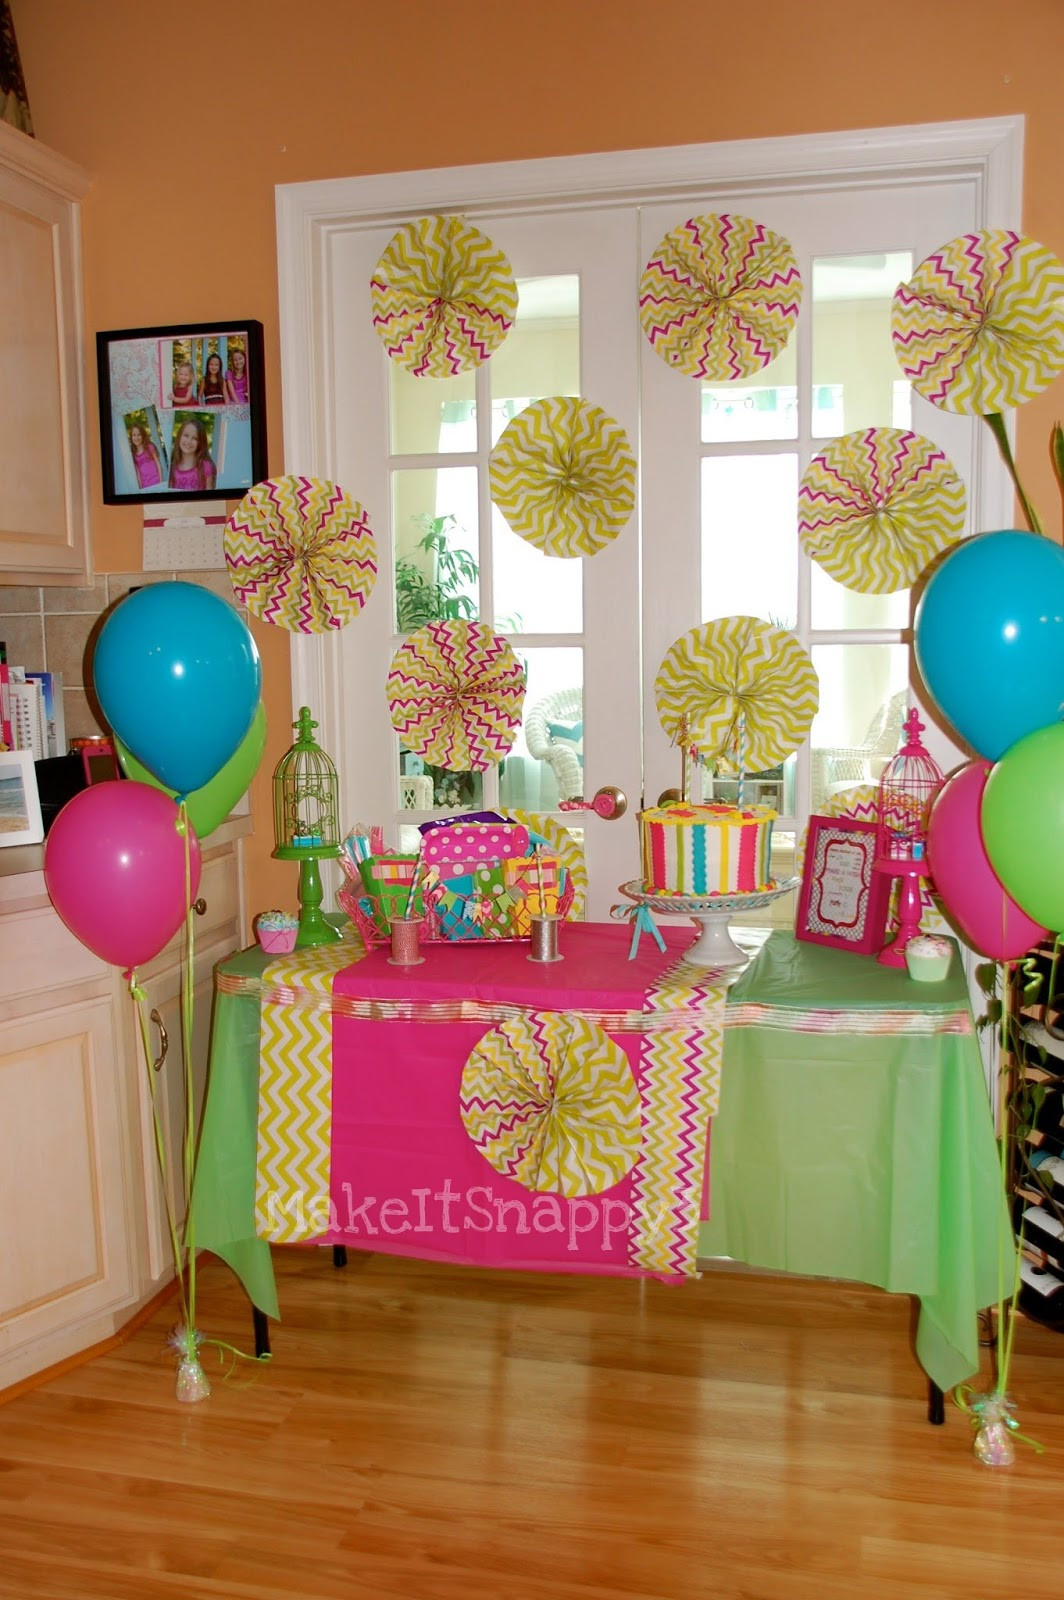 Friends Birthday Party Ideas
 Make It Snappy Lego Friends Birthday Party